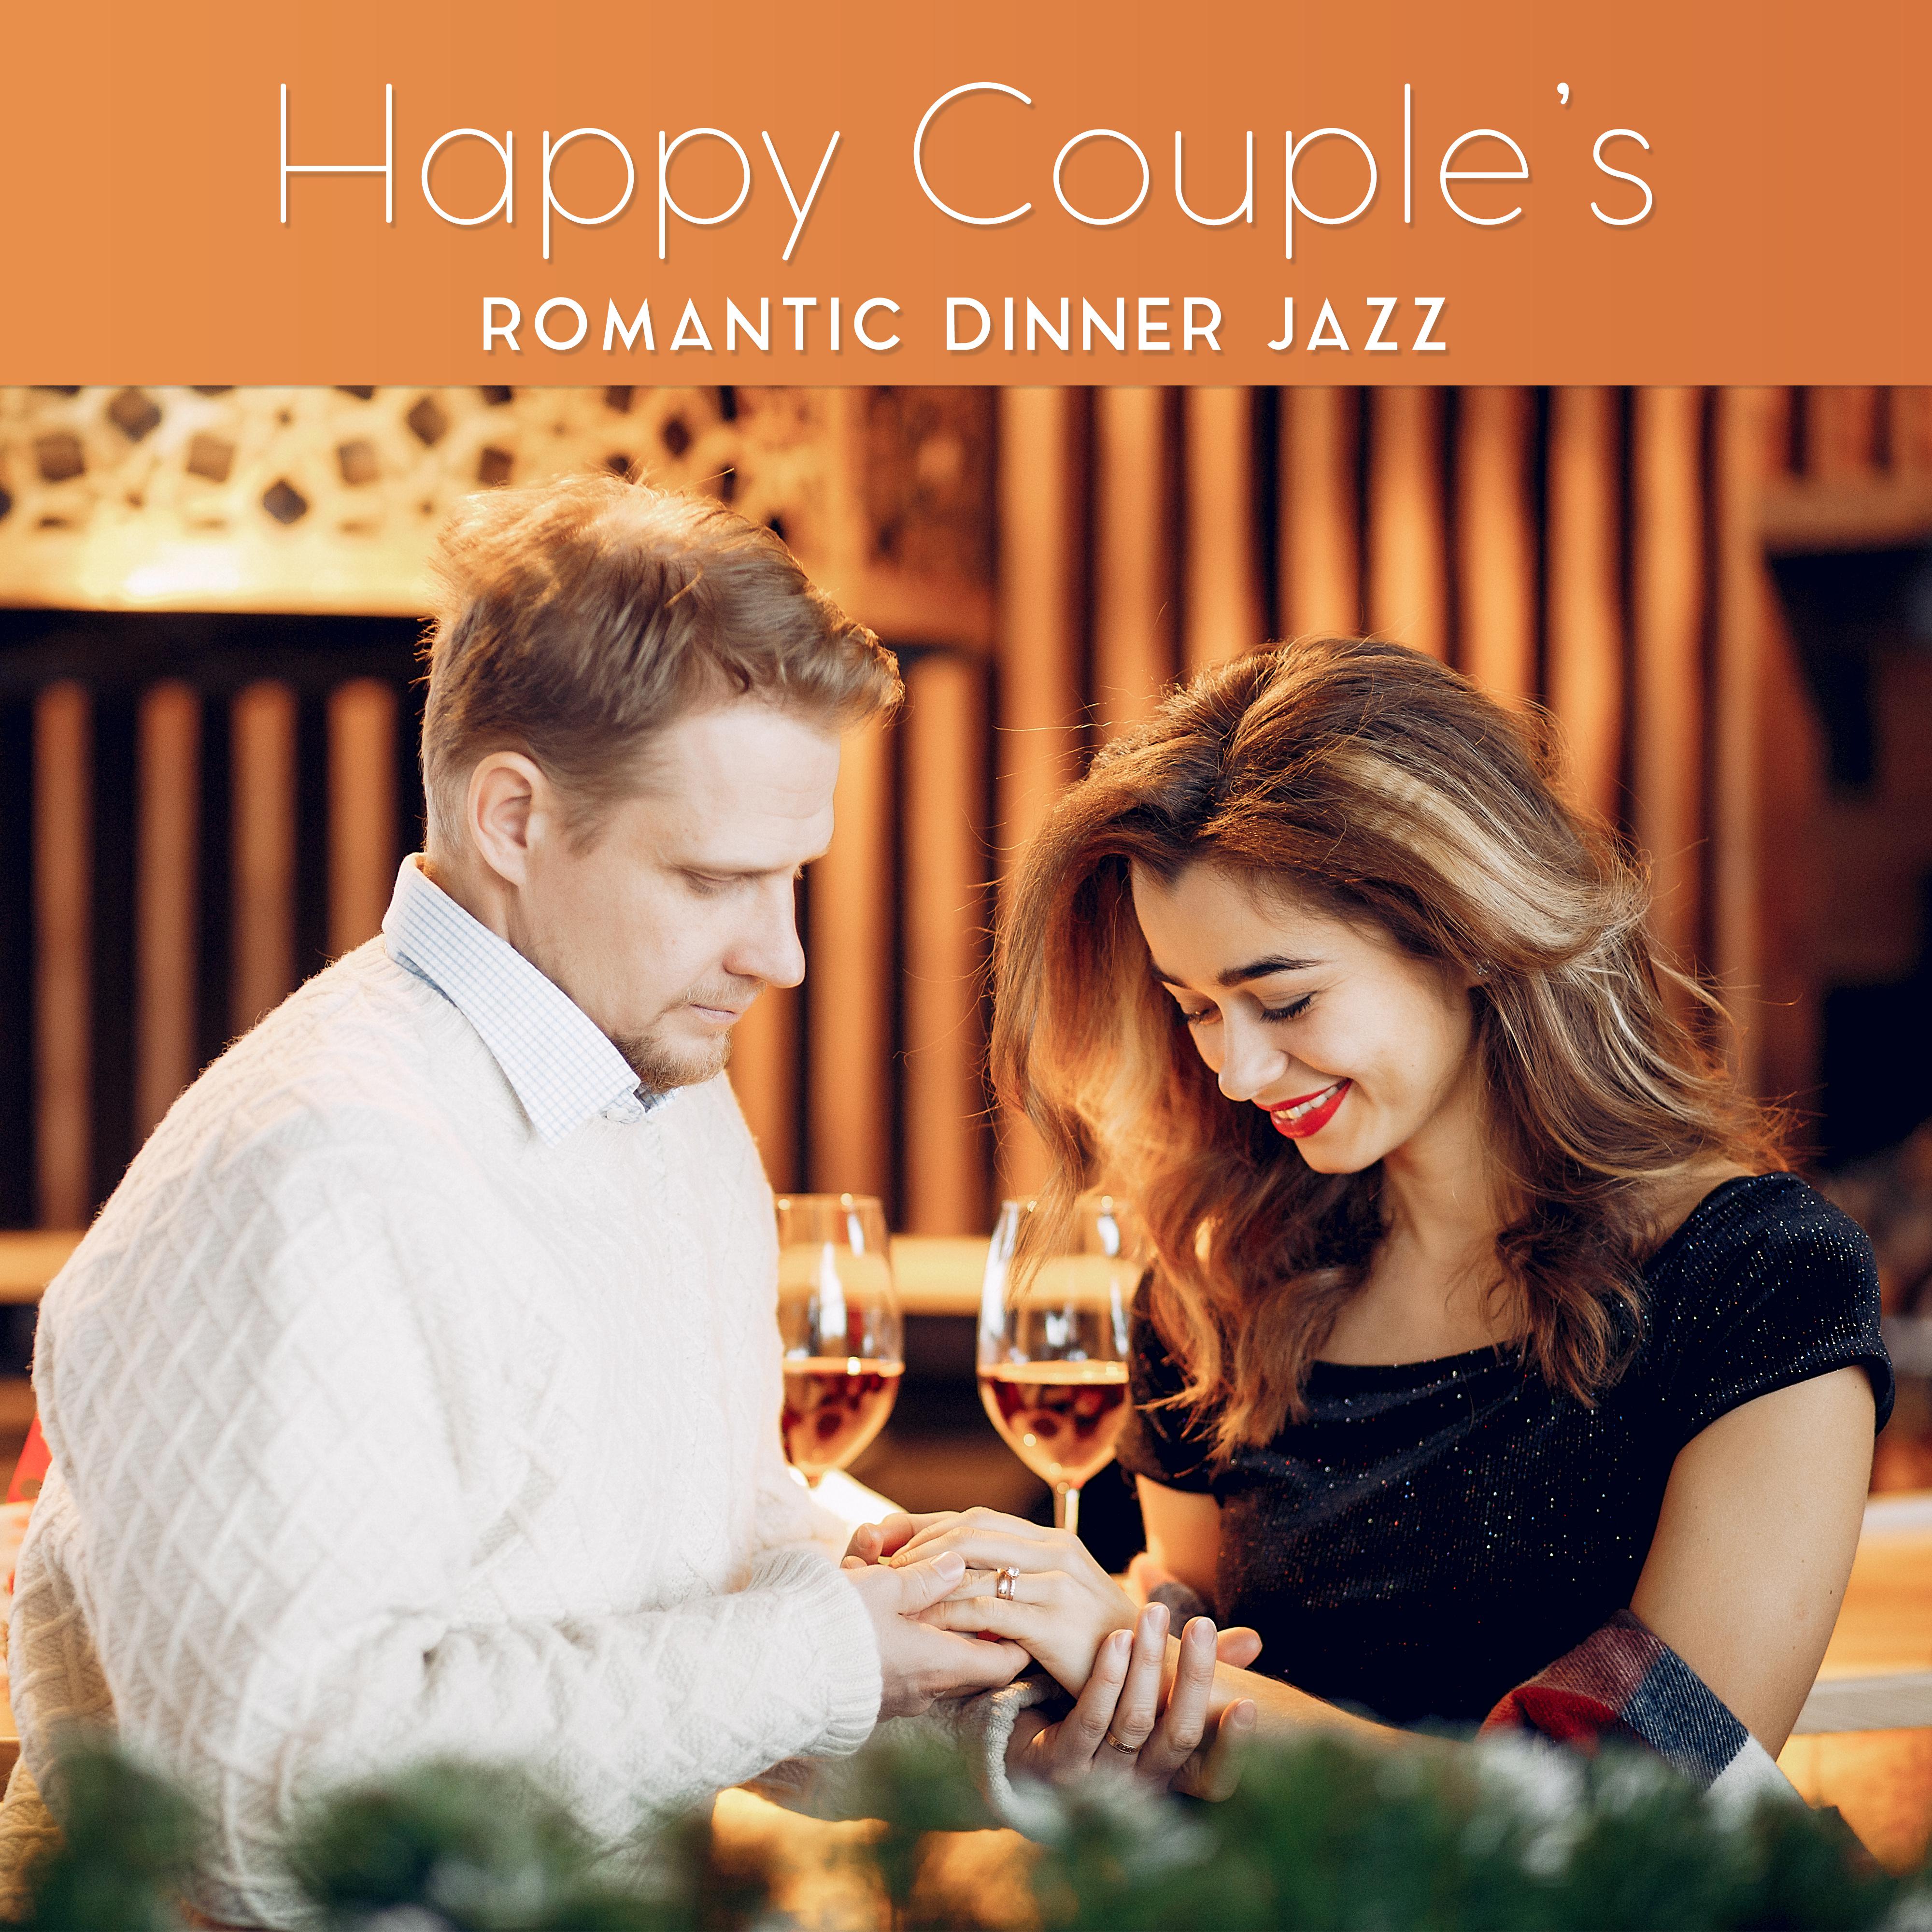 Happy Couple' s Romantic Dinner Jazz: 2019 Instrumental Smooth Jazz Music for Restaurant or Cafe Background, Songs for Romantic Time Spending Together, Vintage Sounds of Piano, Sax, Trumpet  More